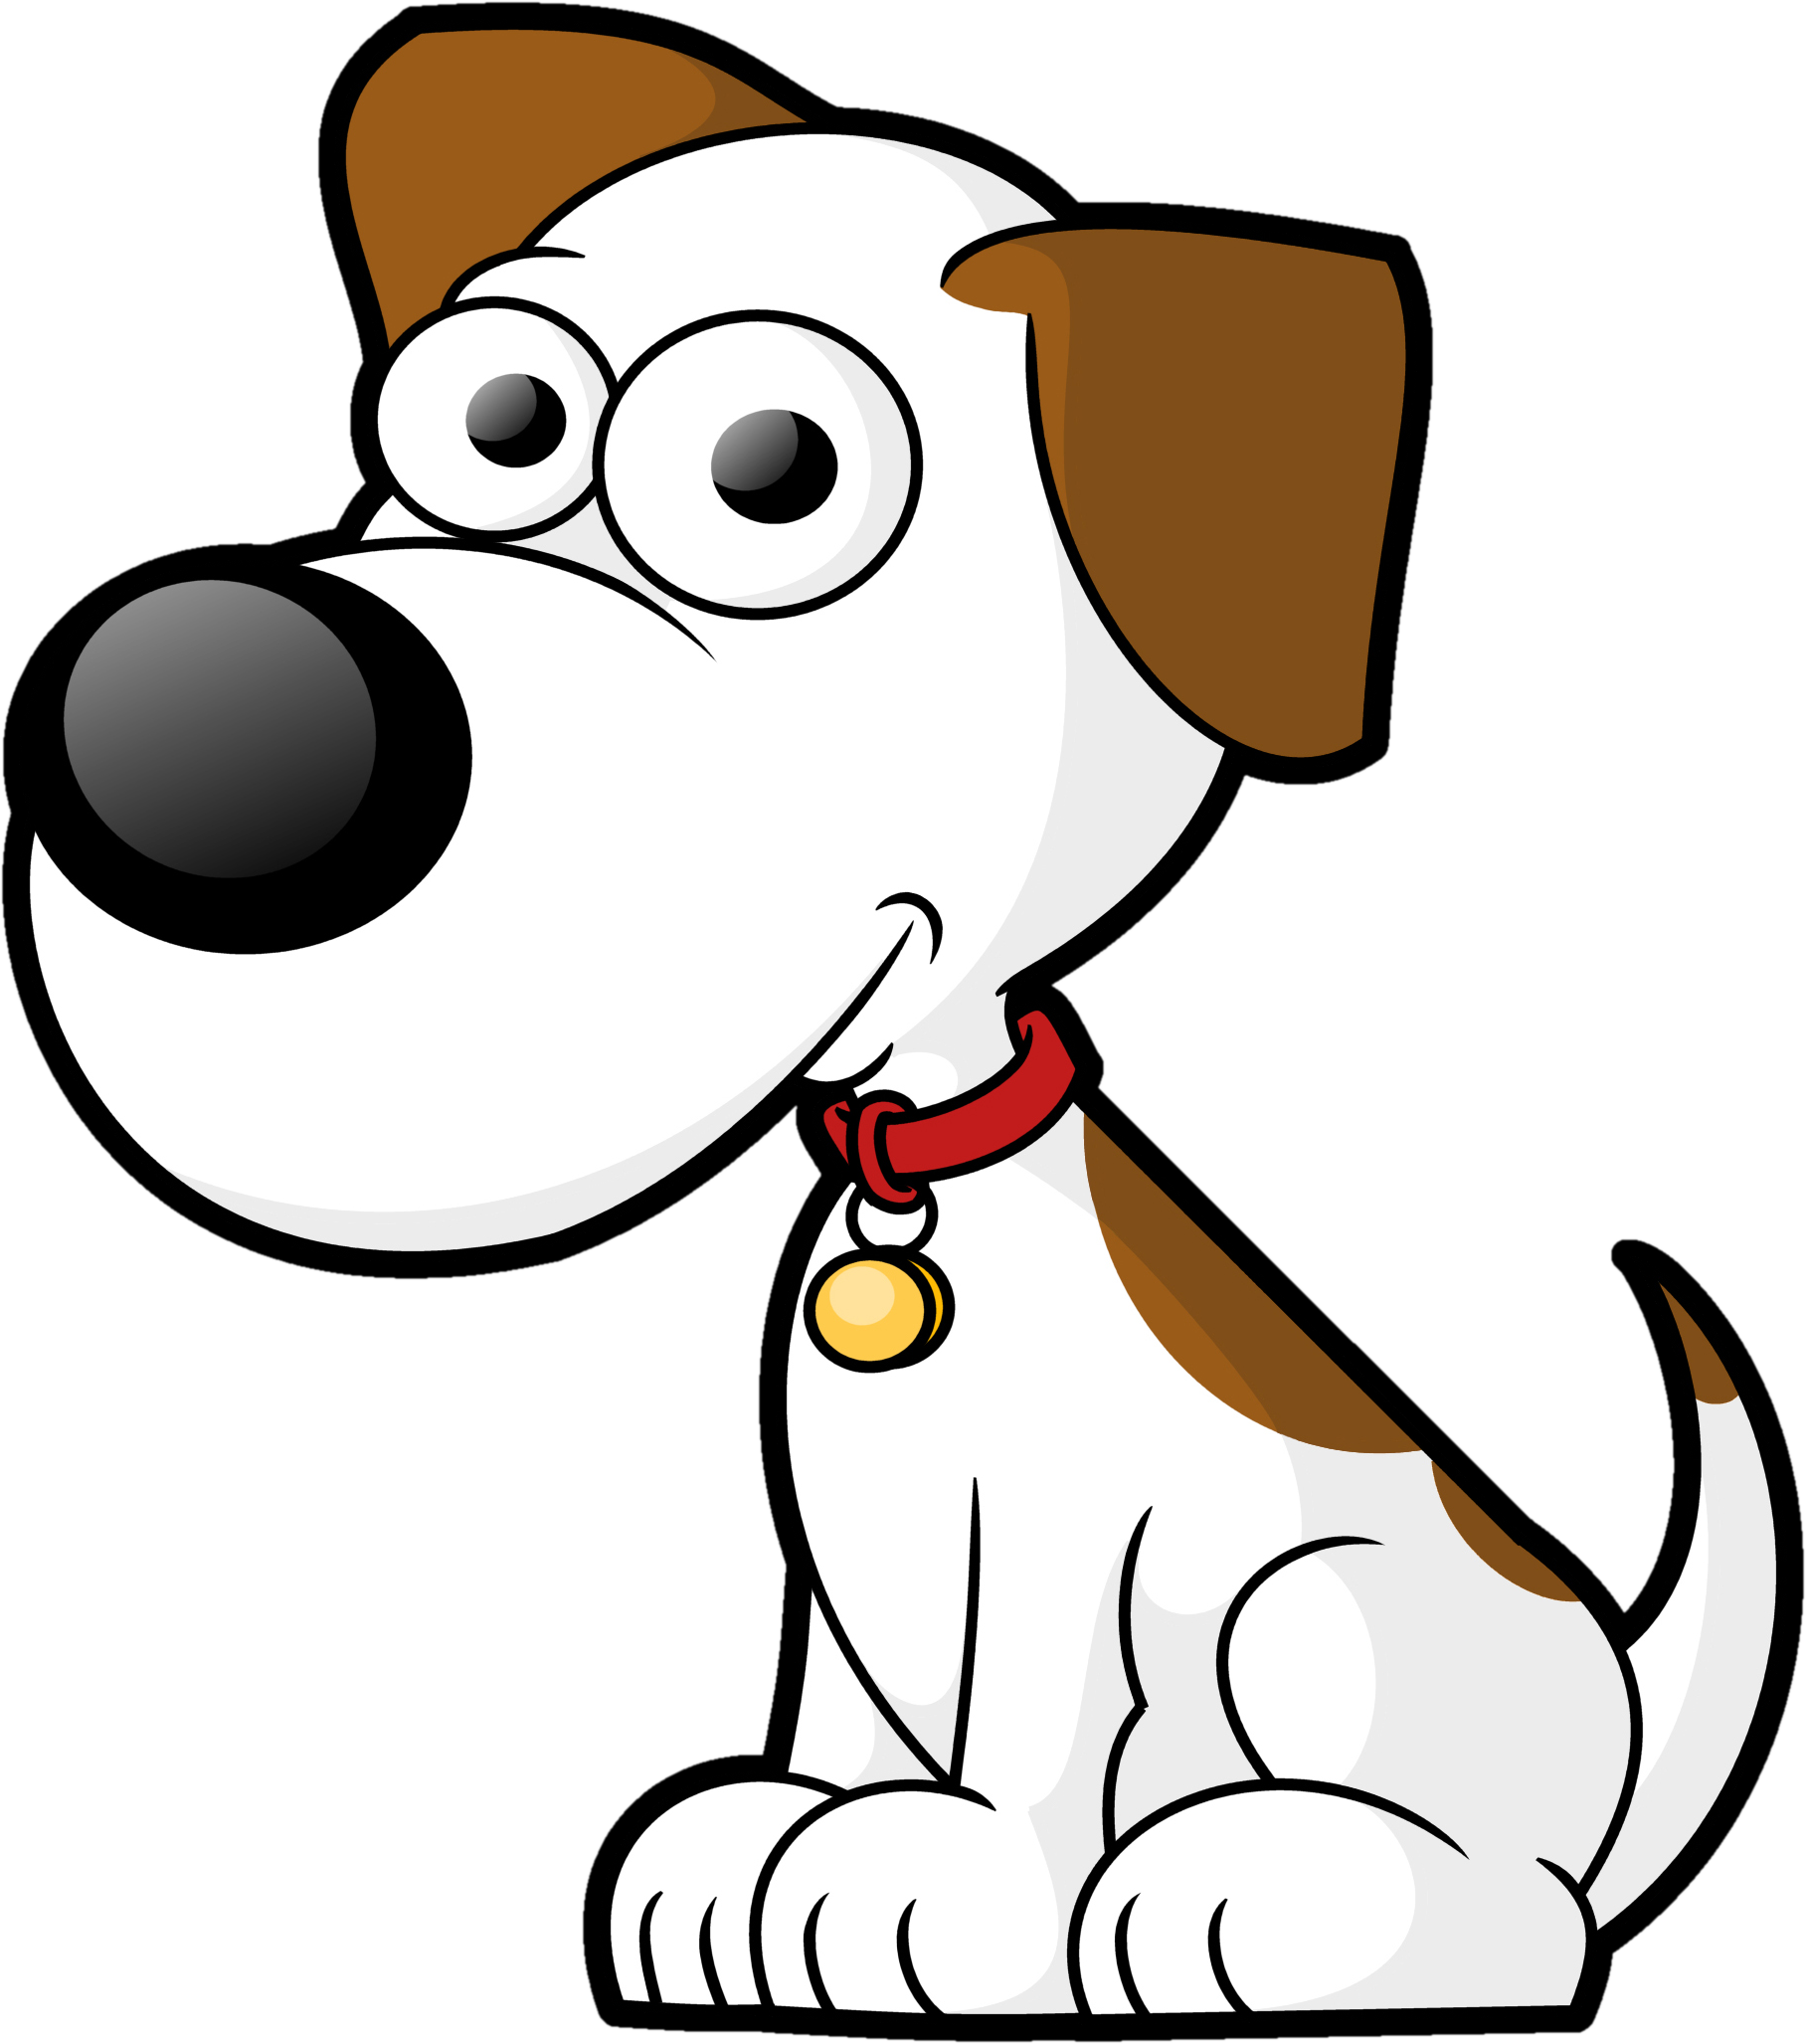 Dog Cartoon PNG Transparent Background, Free Download #31583 - FreeIconsPNG